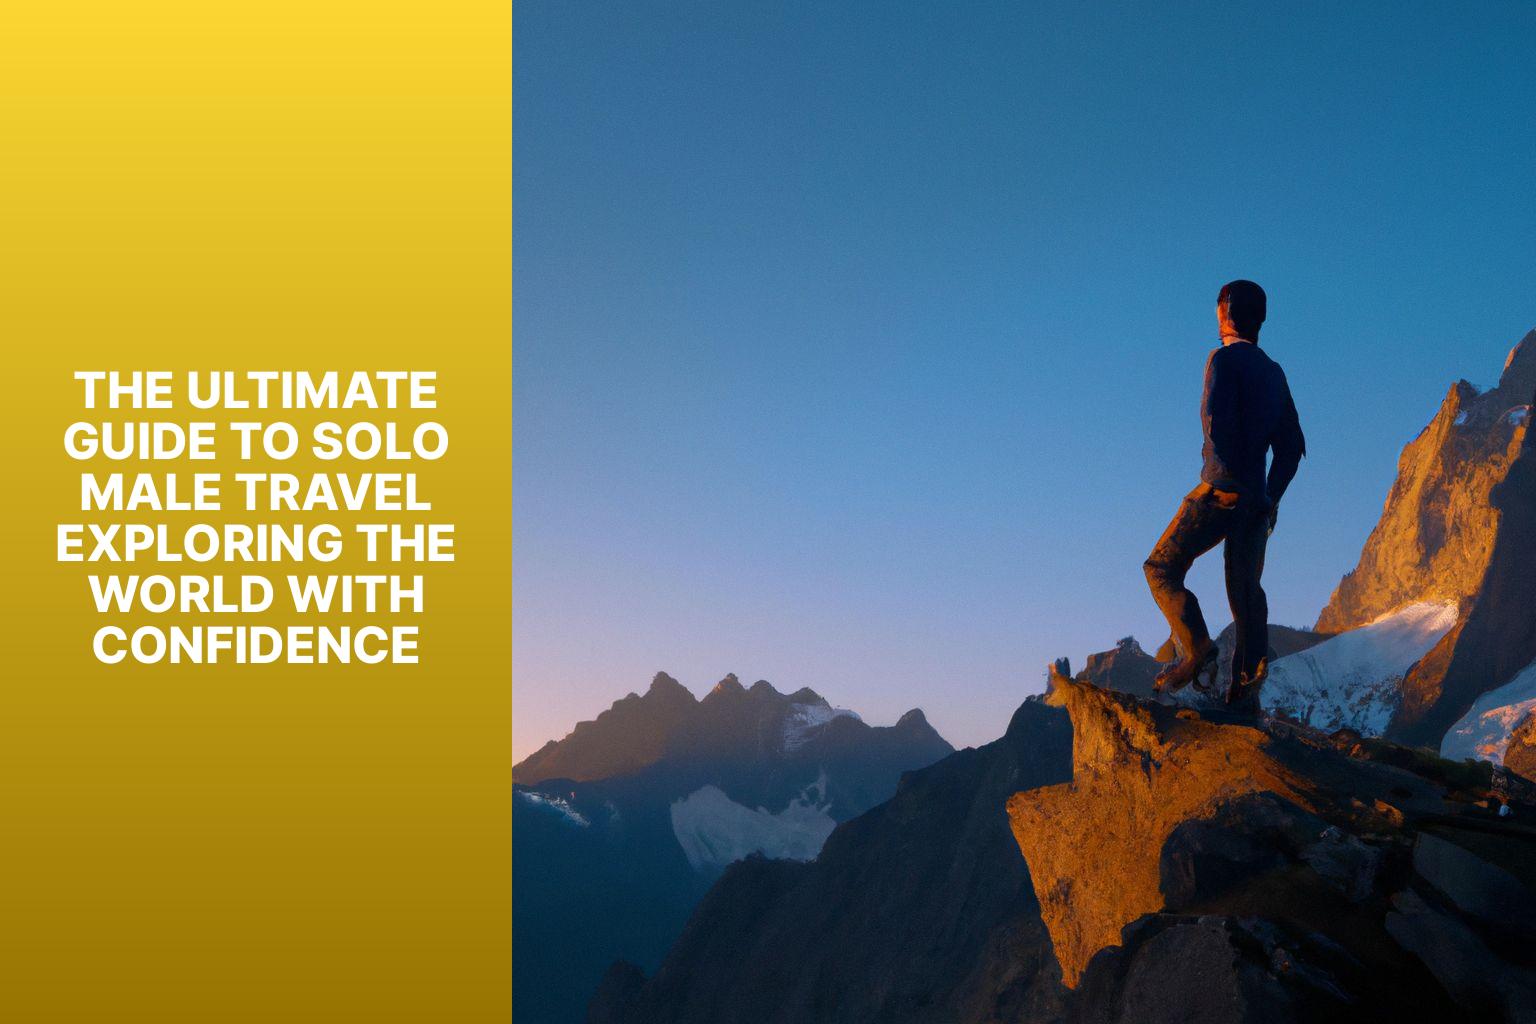 The Ultimate Guide to Solo Male Travel: Exploring the World with Confidence